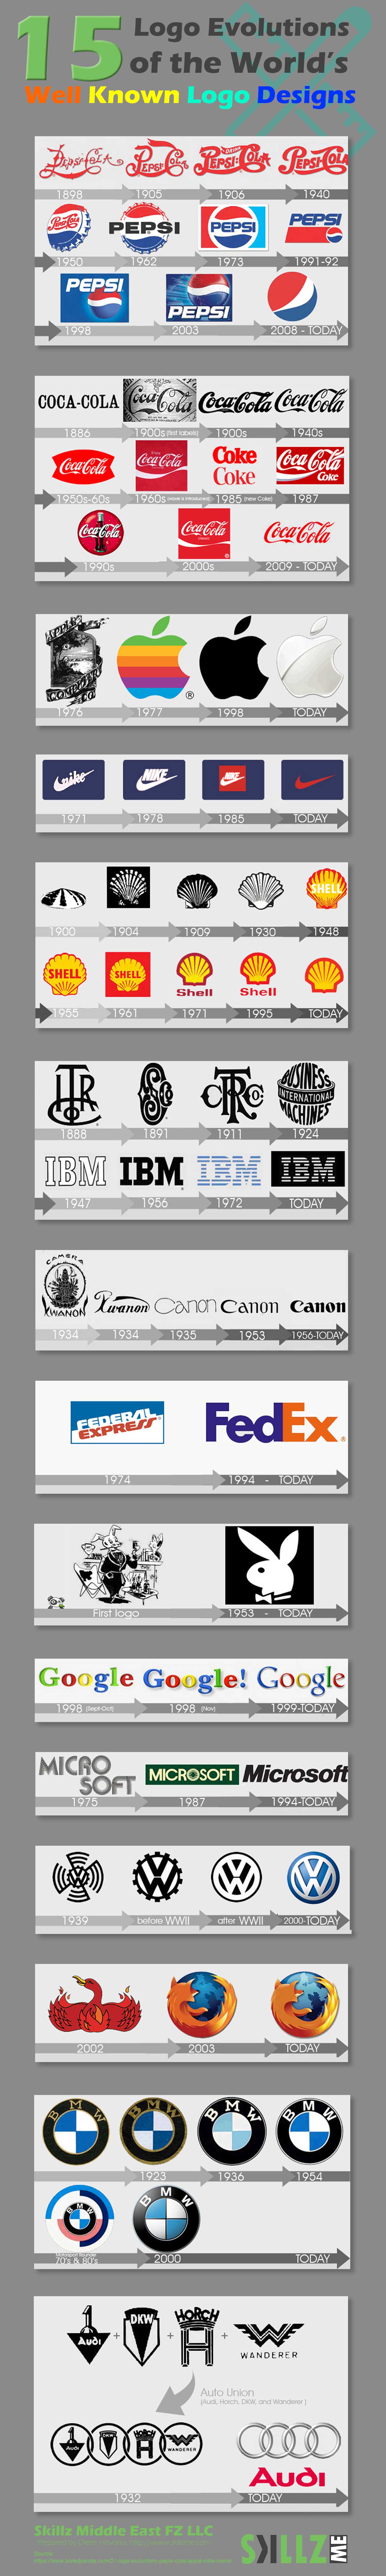 15 logo evolutions of the worlds well know Logo Designs